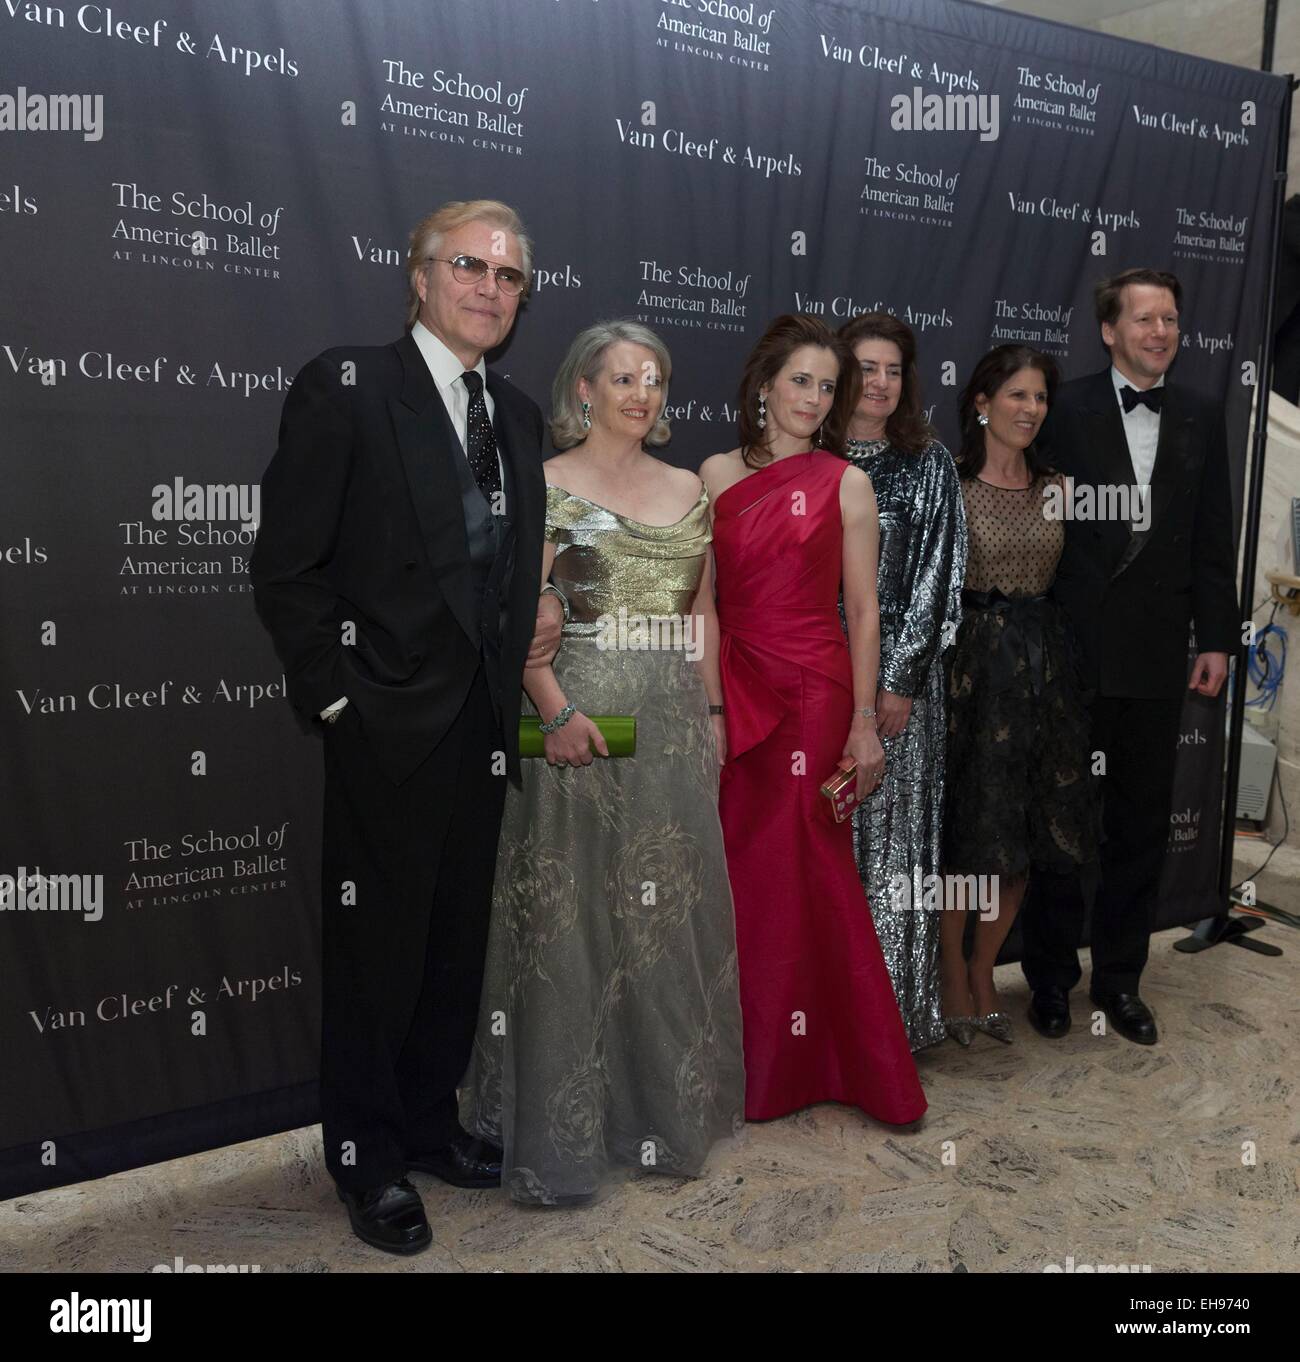 New York, NY, USA. Mar 9, 2015. Peter Martins, Serena Lese, Joyce Giuffra, Laura, Marjorie Van Dercook Zeckendorf, Nicolas Luchsinger aux arrivées pour la School of American Ballet 2015 Winer Ball, David H. Koch Theater au Lincoln Center, New York, NY Ma Banque D'Images